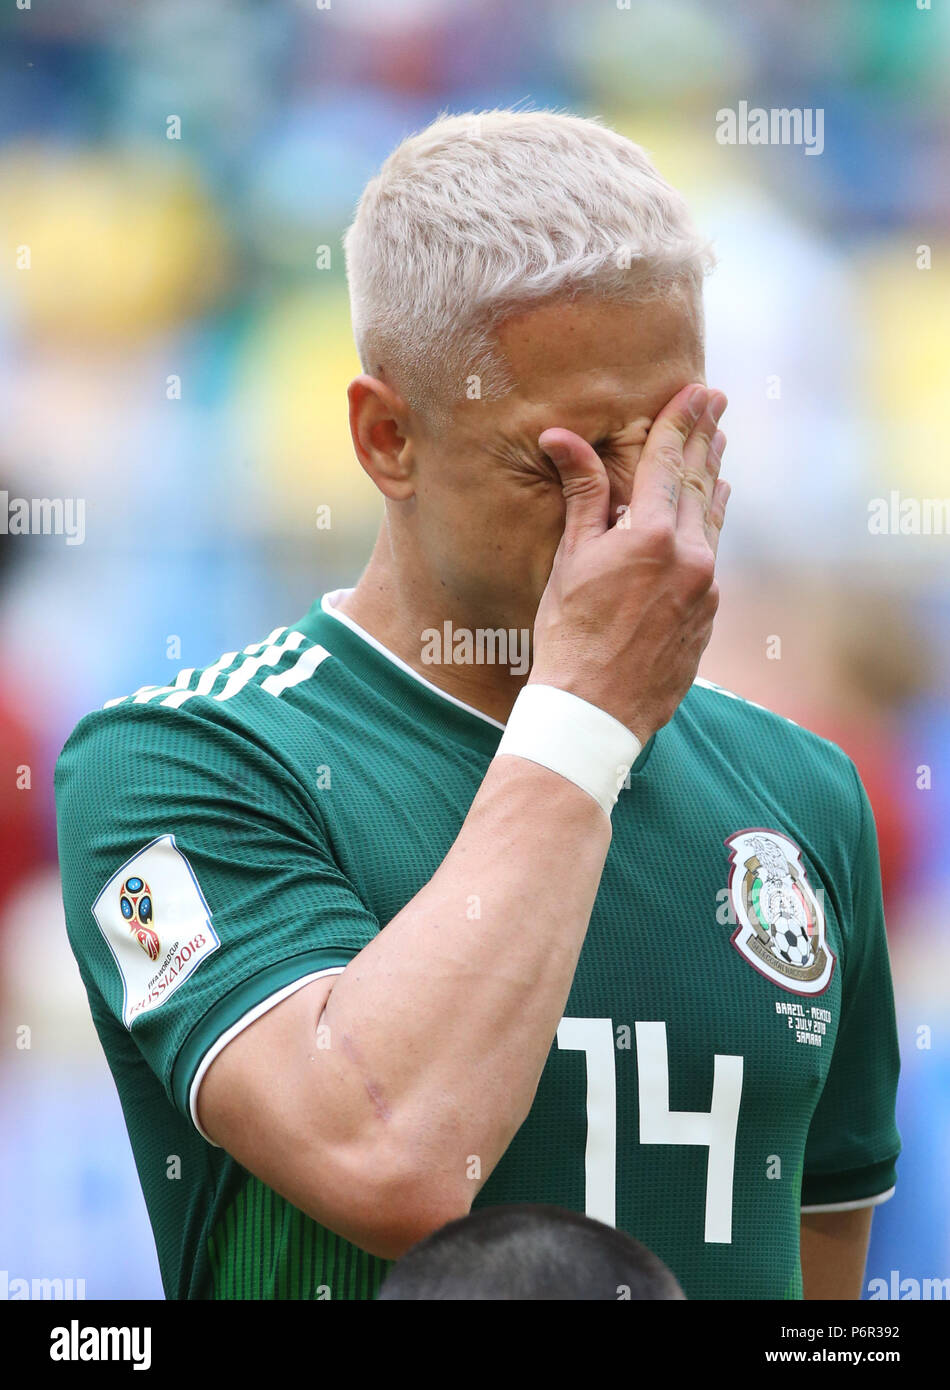 Samara, Russia. 2nd July, 2018. Javier Hernandez of Mexico is seen prior to the 2018 FIFA World Cup round of 16 match between Brazil and Mexico in Samara, Russia, July 2, 2018. Credit: Li Ming/Xinhua/Alamy Live News Stock Photo